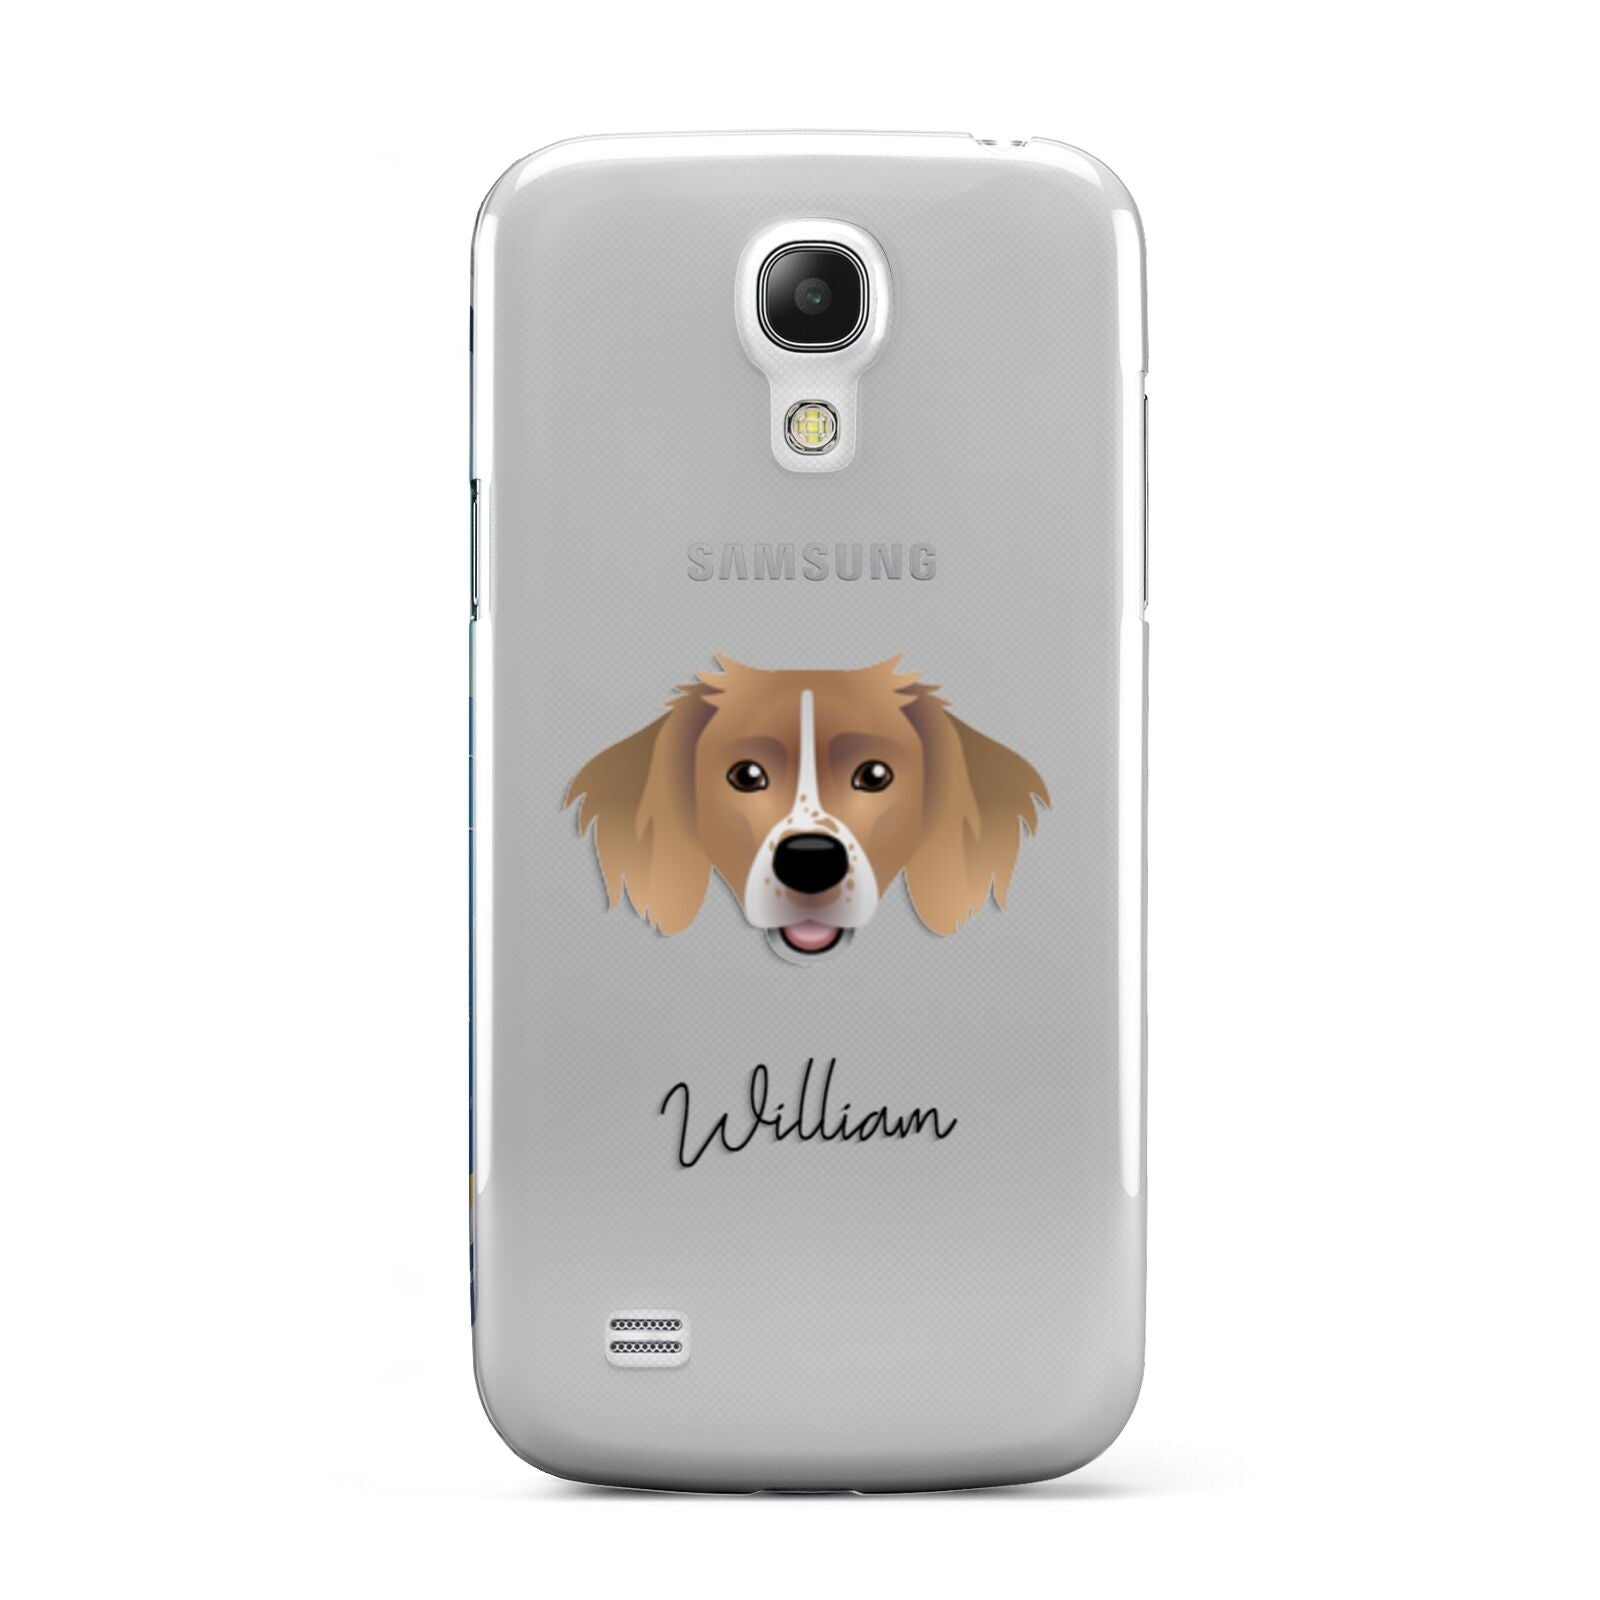 Sprollie Personalised Samsung Galaxy S4 Mini Case